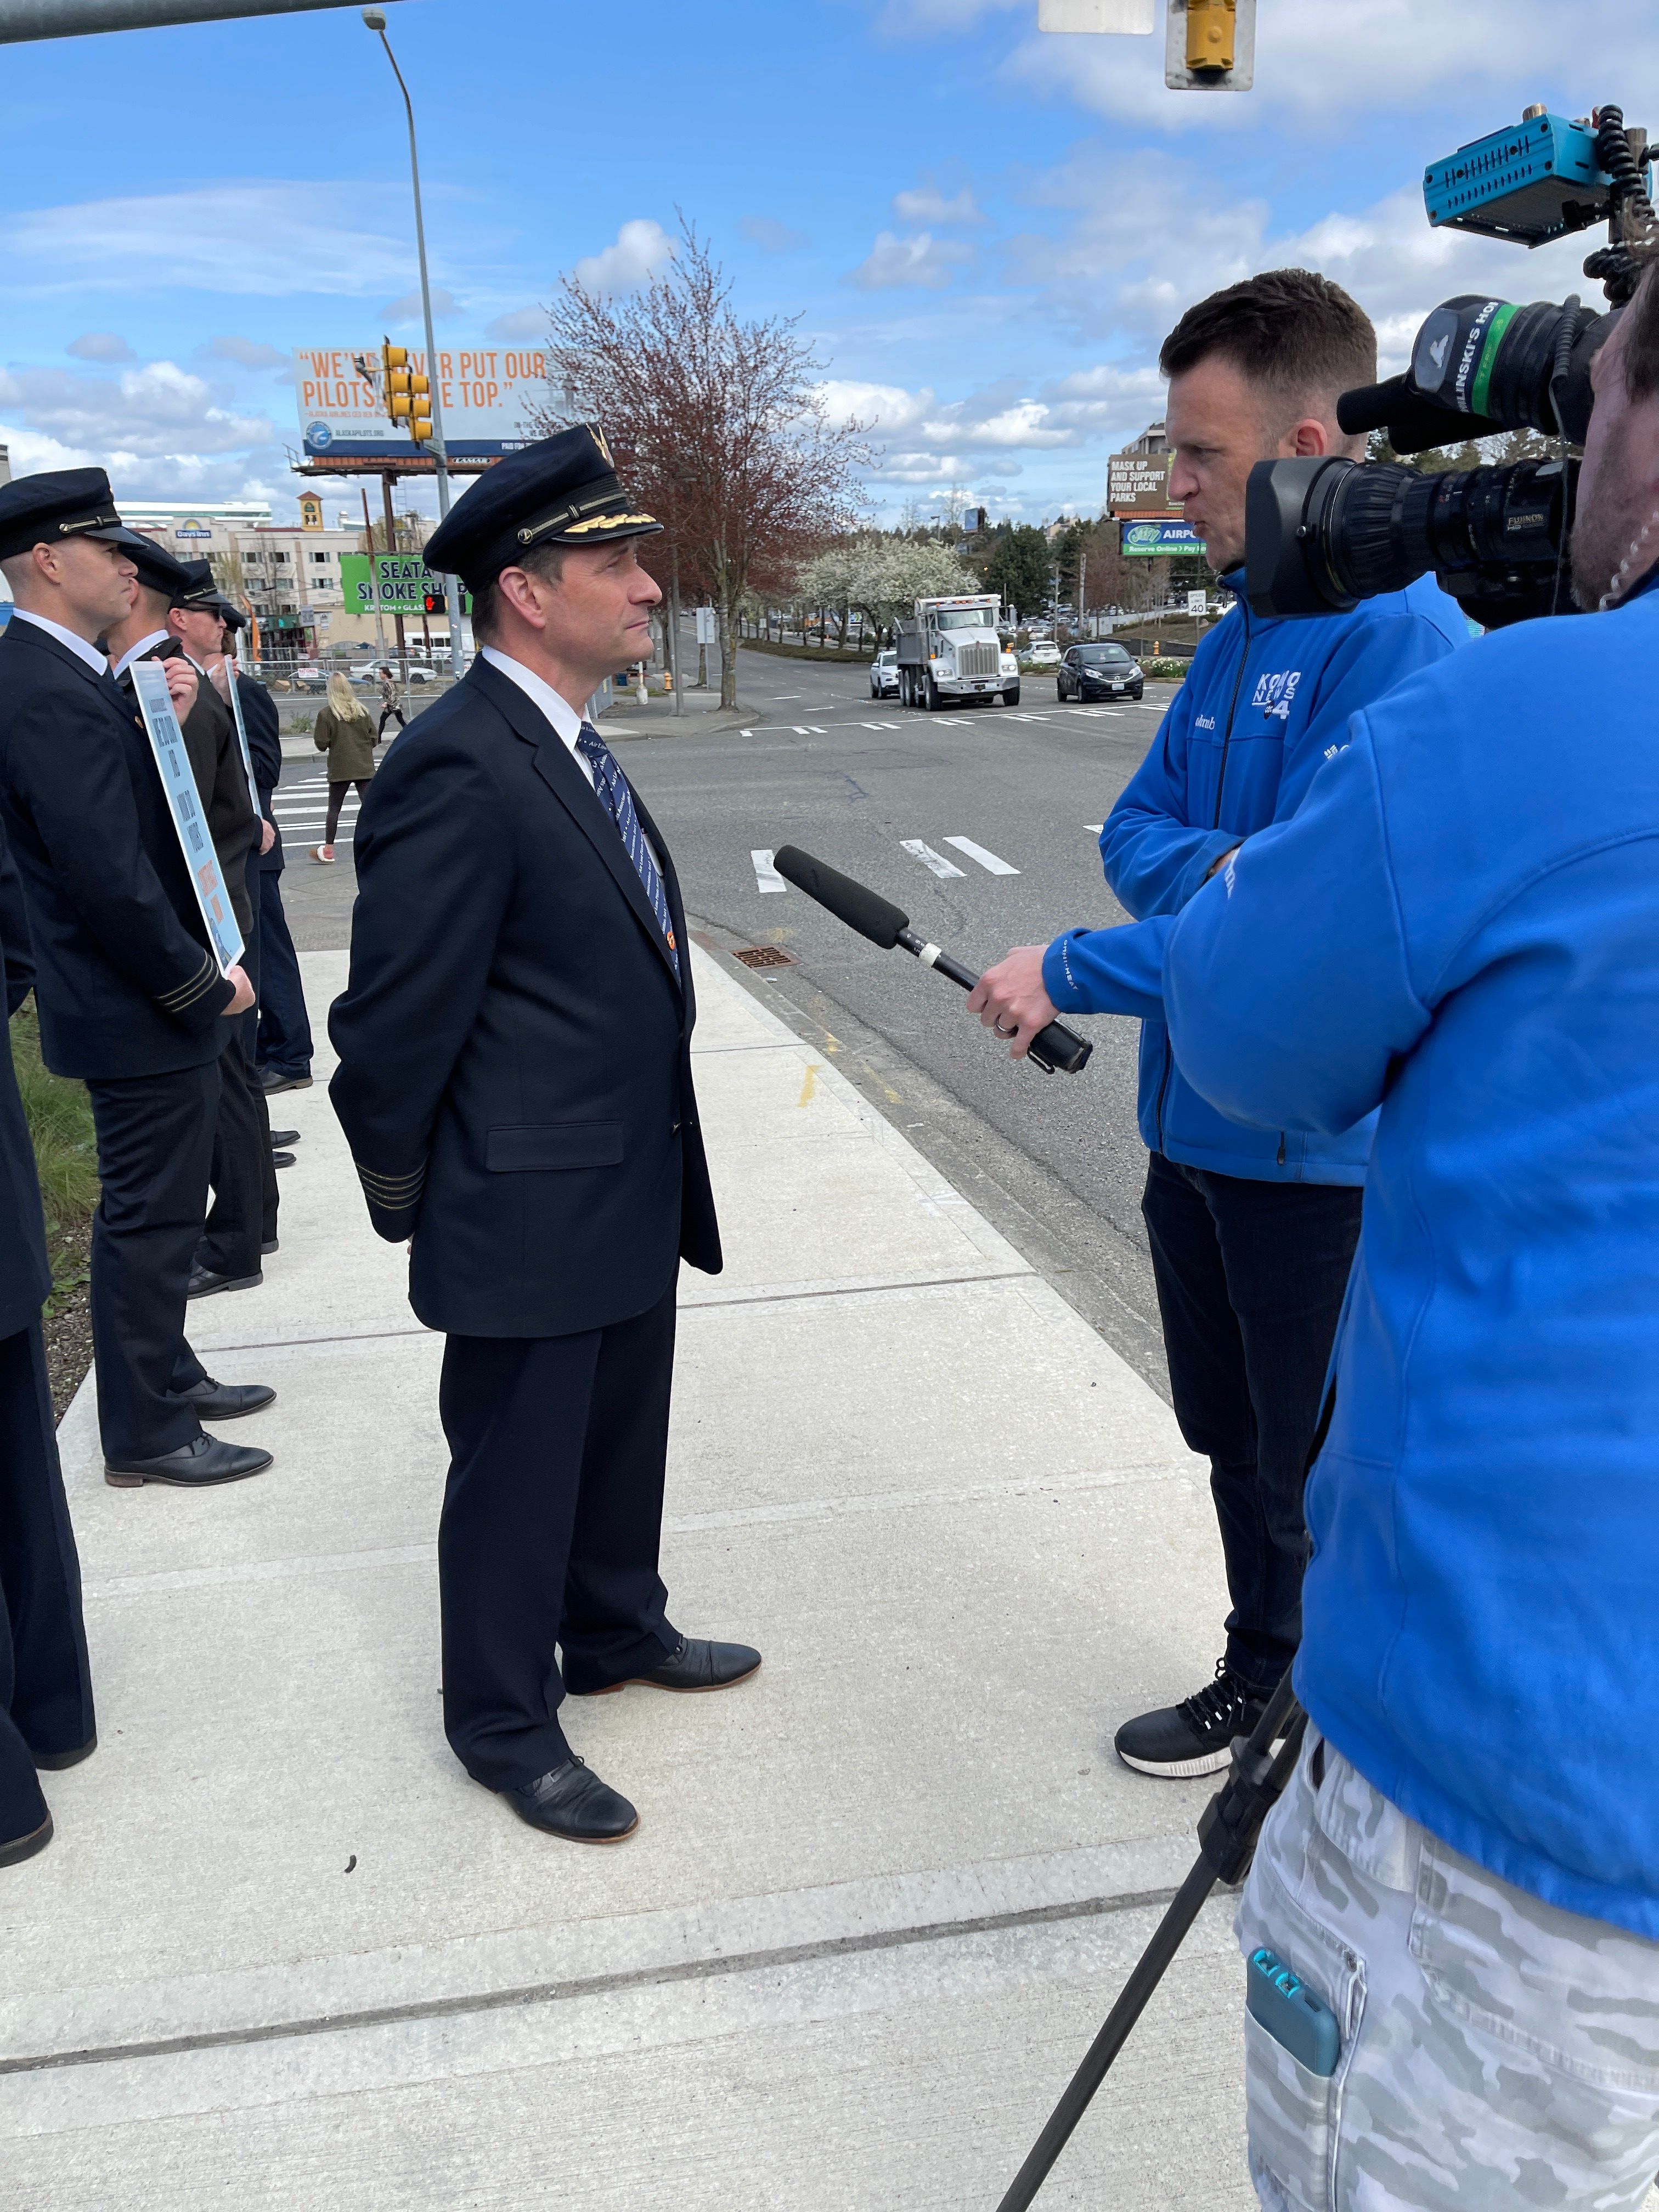 Capt. Will McQuillen, chairman of the Alaska Airlines ALPA MEC, Speaking to media at an Informational Picket